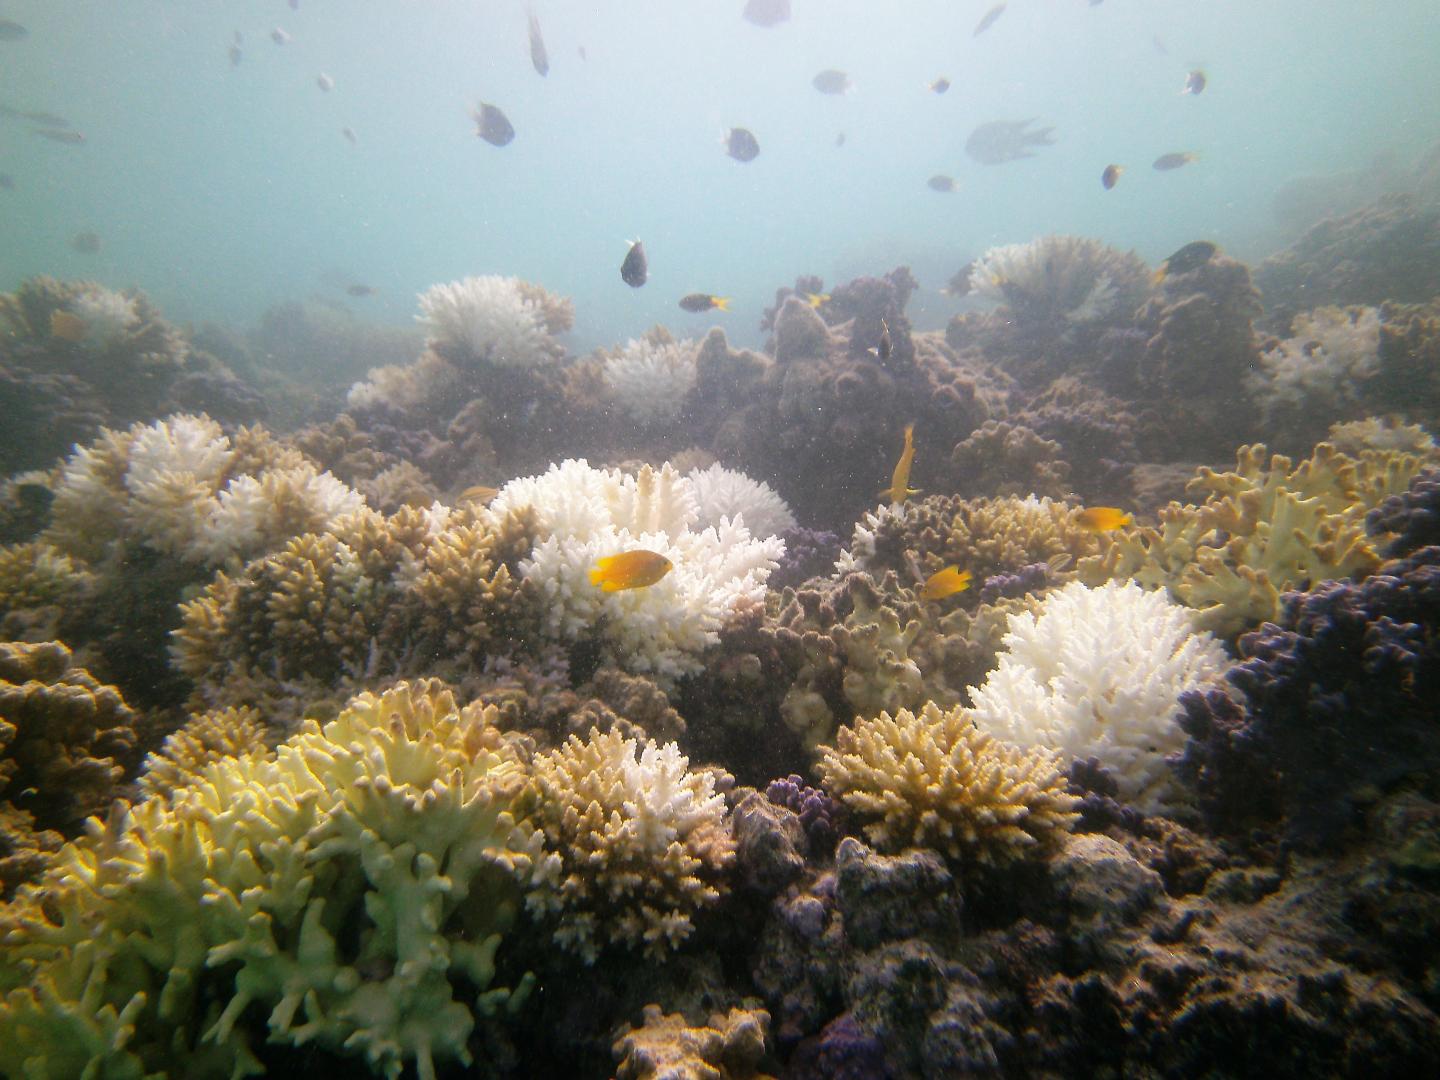 Coral bleaching occurs because of warmer ocean water